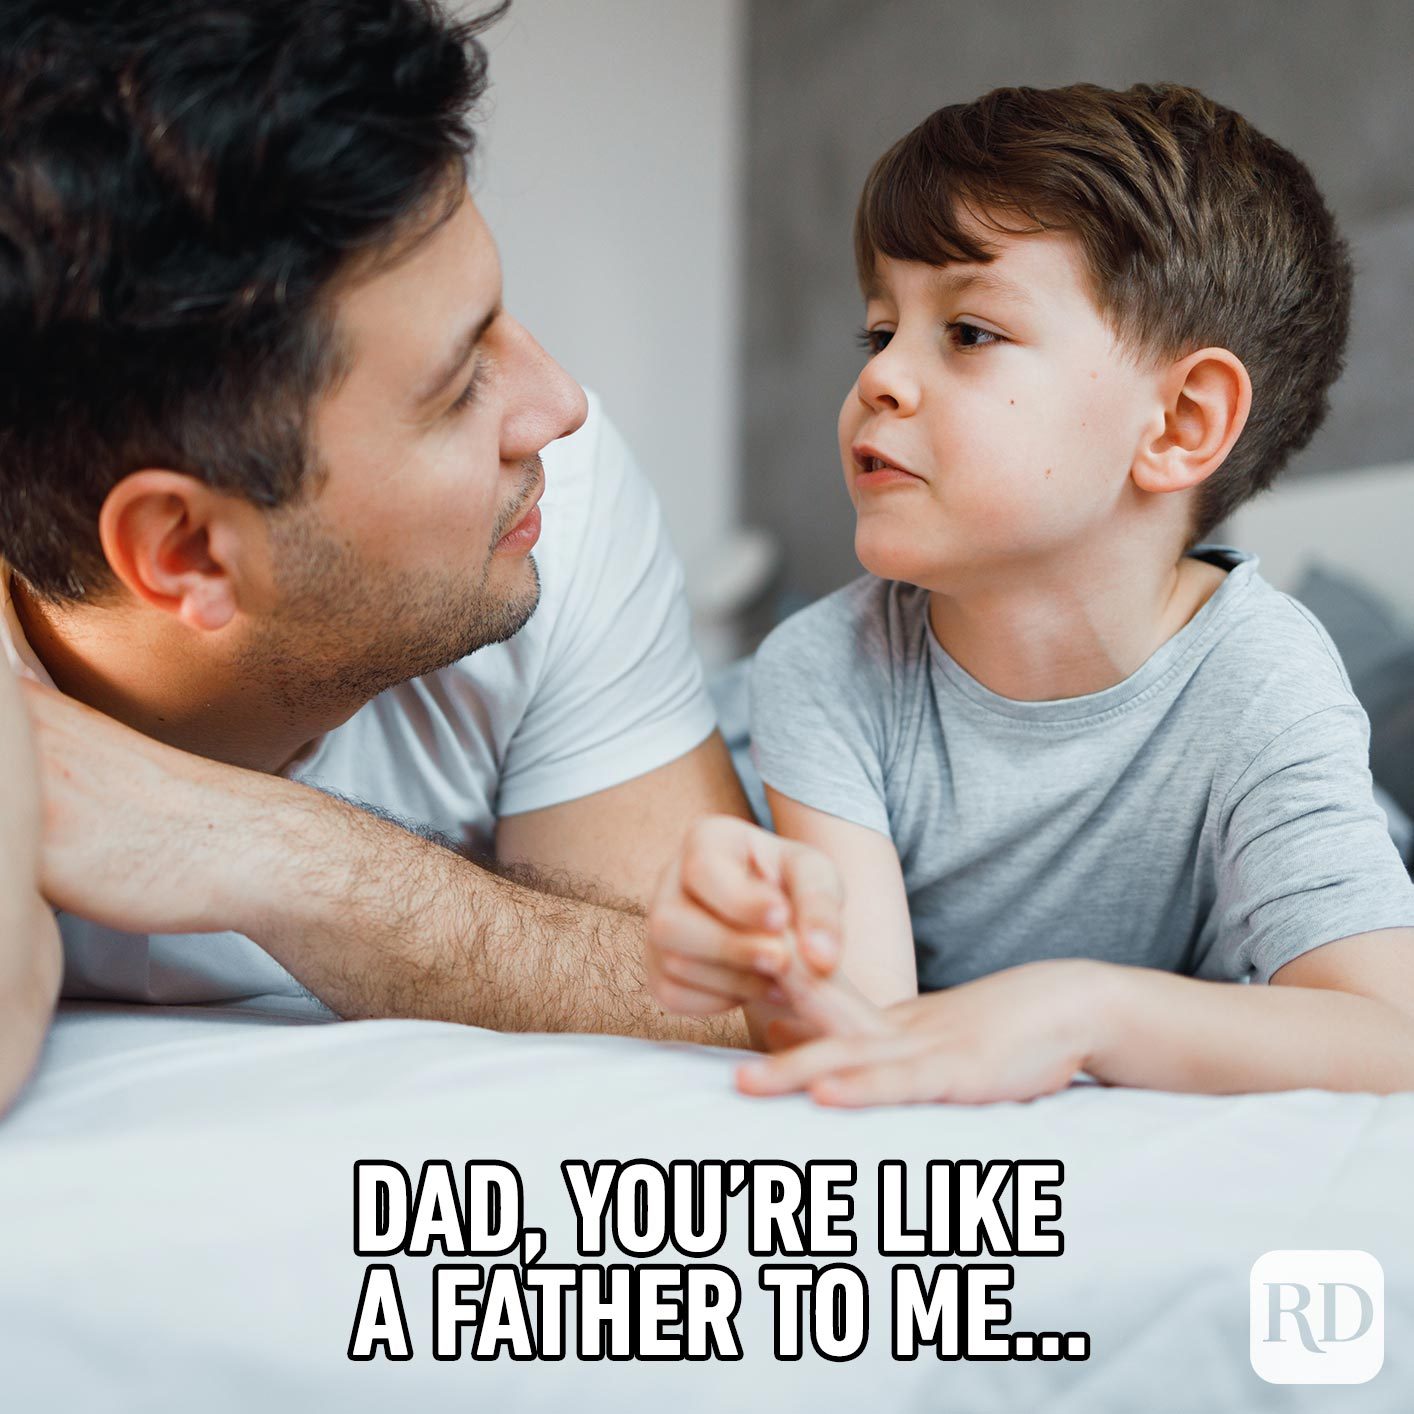 Son talking to father. Meme text: Dad, you're like a father to me…